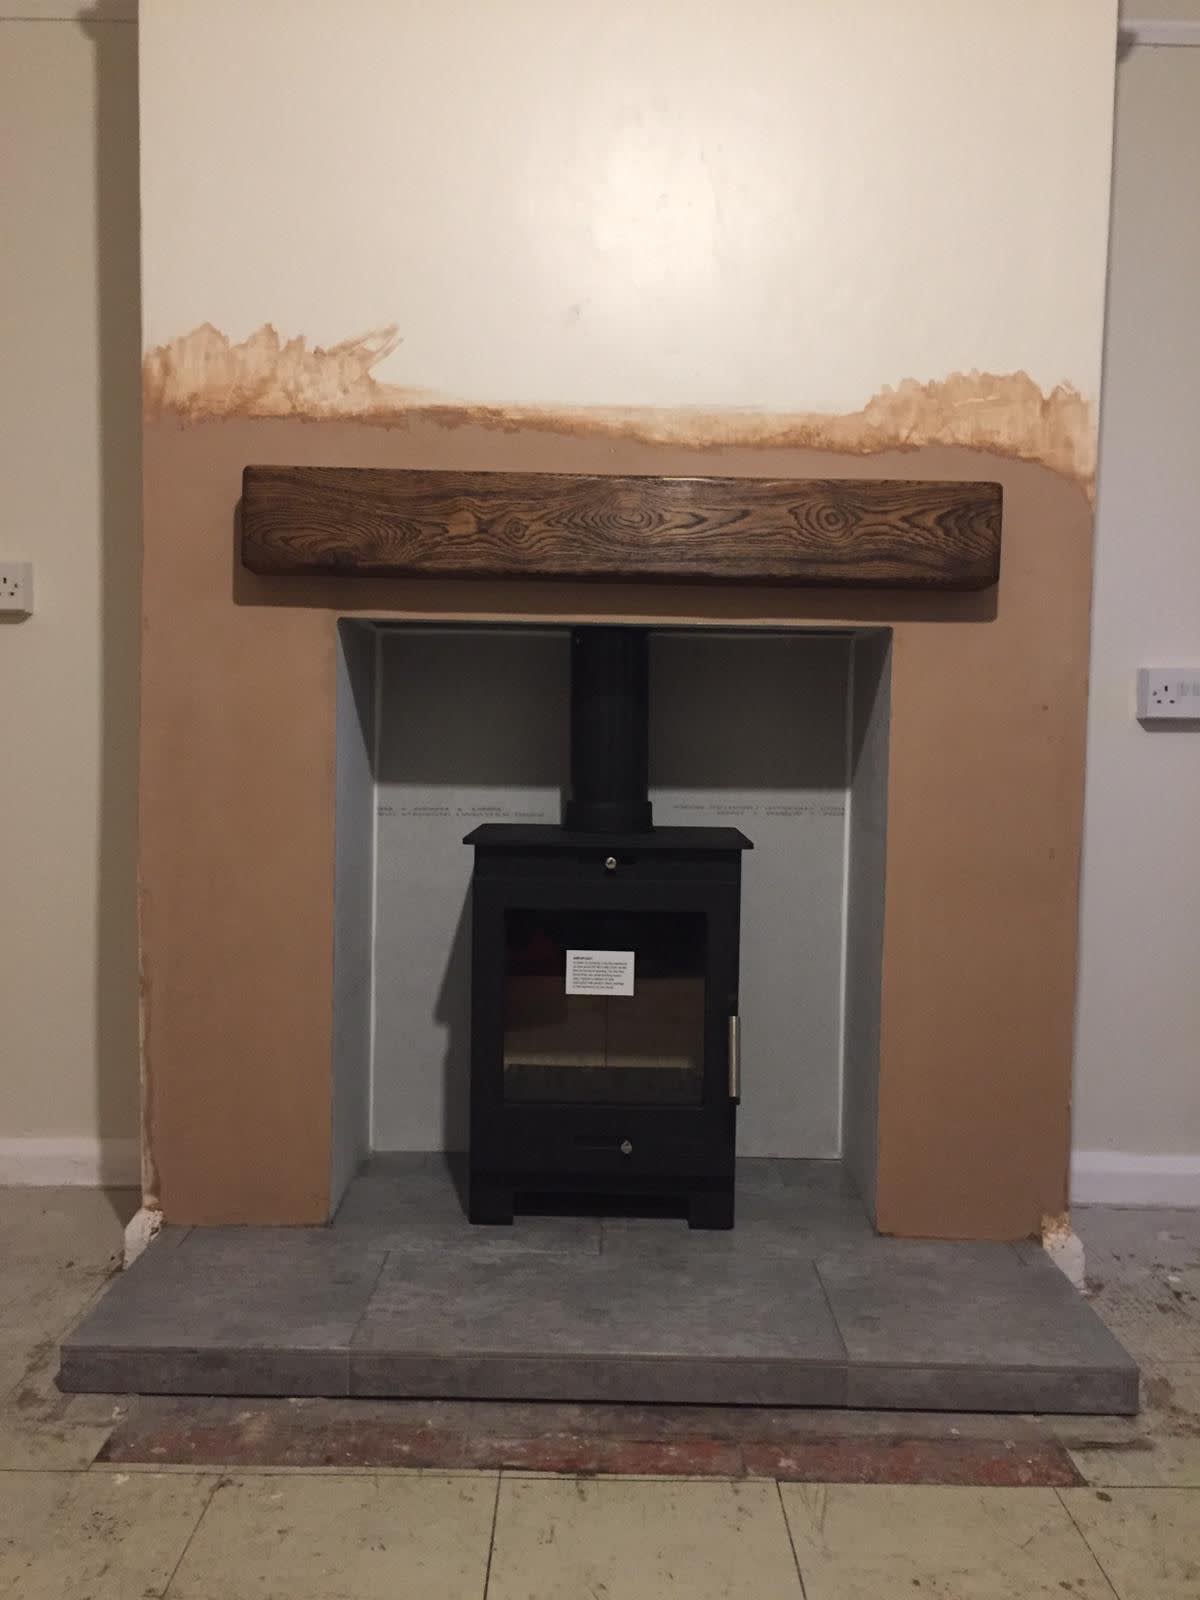 Images Chimney Sweep Fireplaces & Stoves